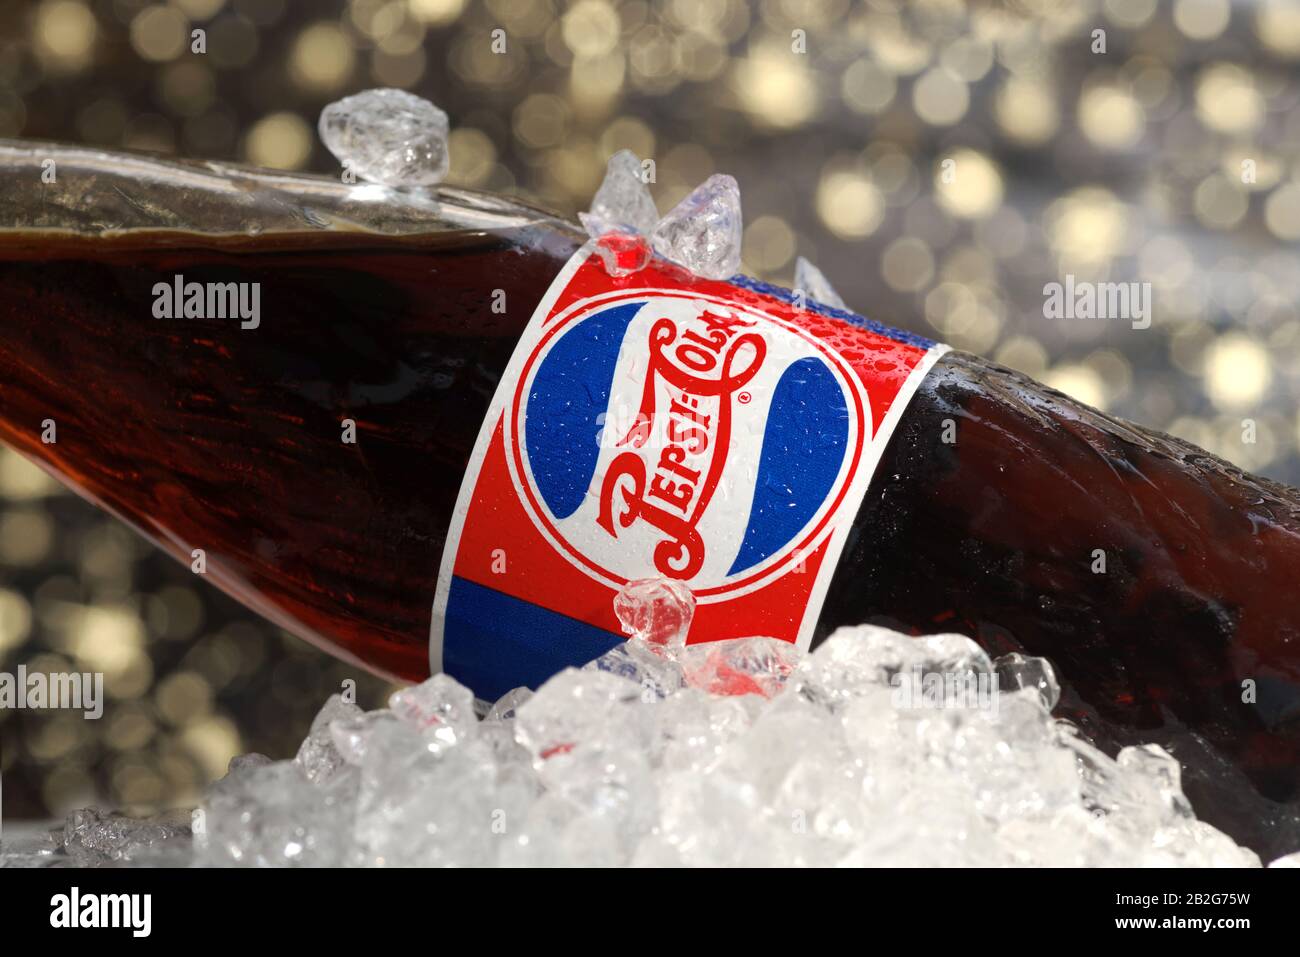 Koszalin, Poland - March 3, 2020: closed Pepsi glass bottle close up. Pepsi is popular carbonated soft drink manufactured by PepsiCo Stock Photo